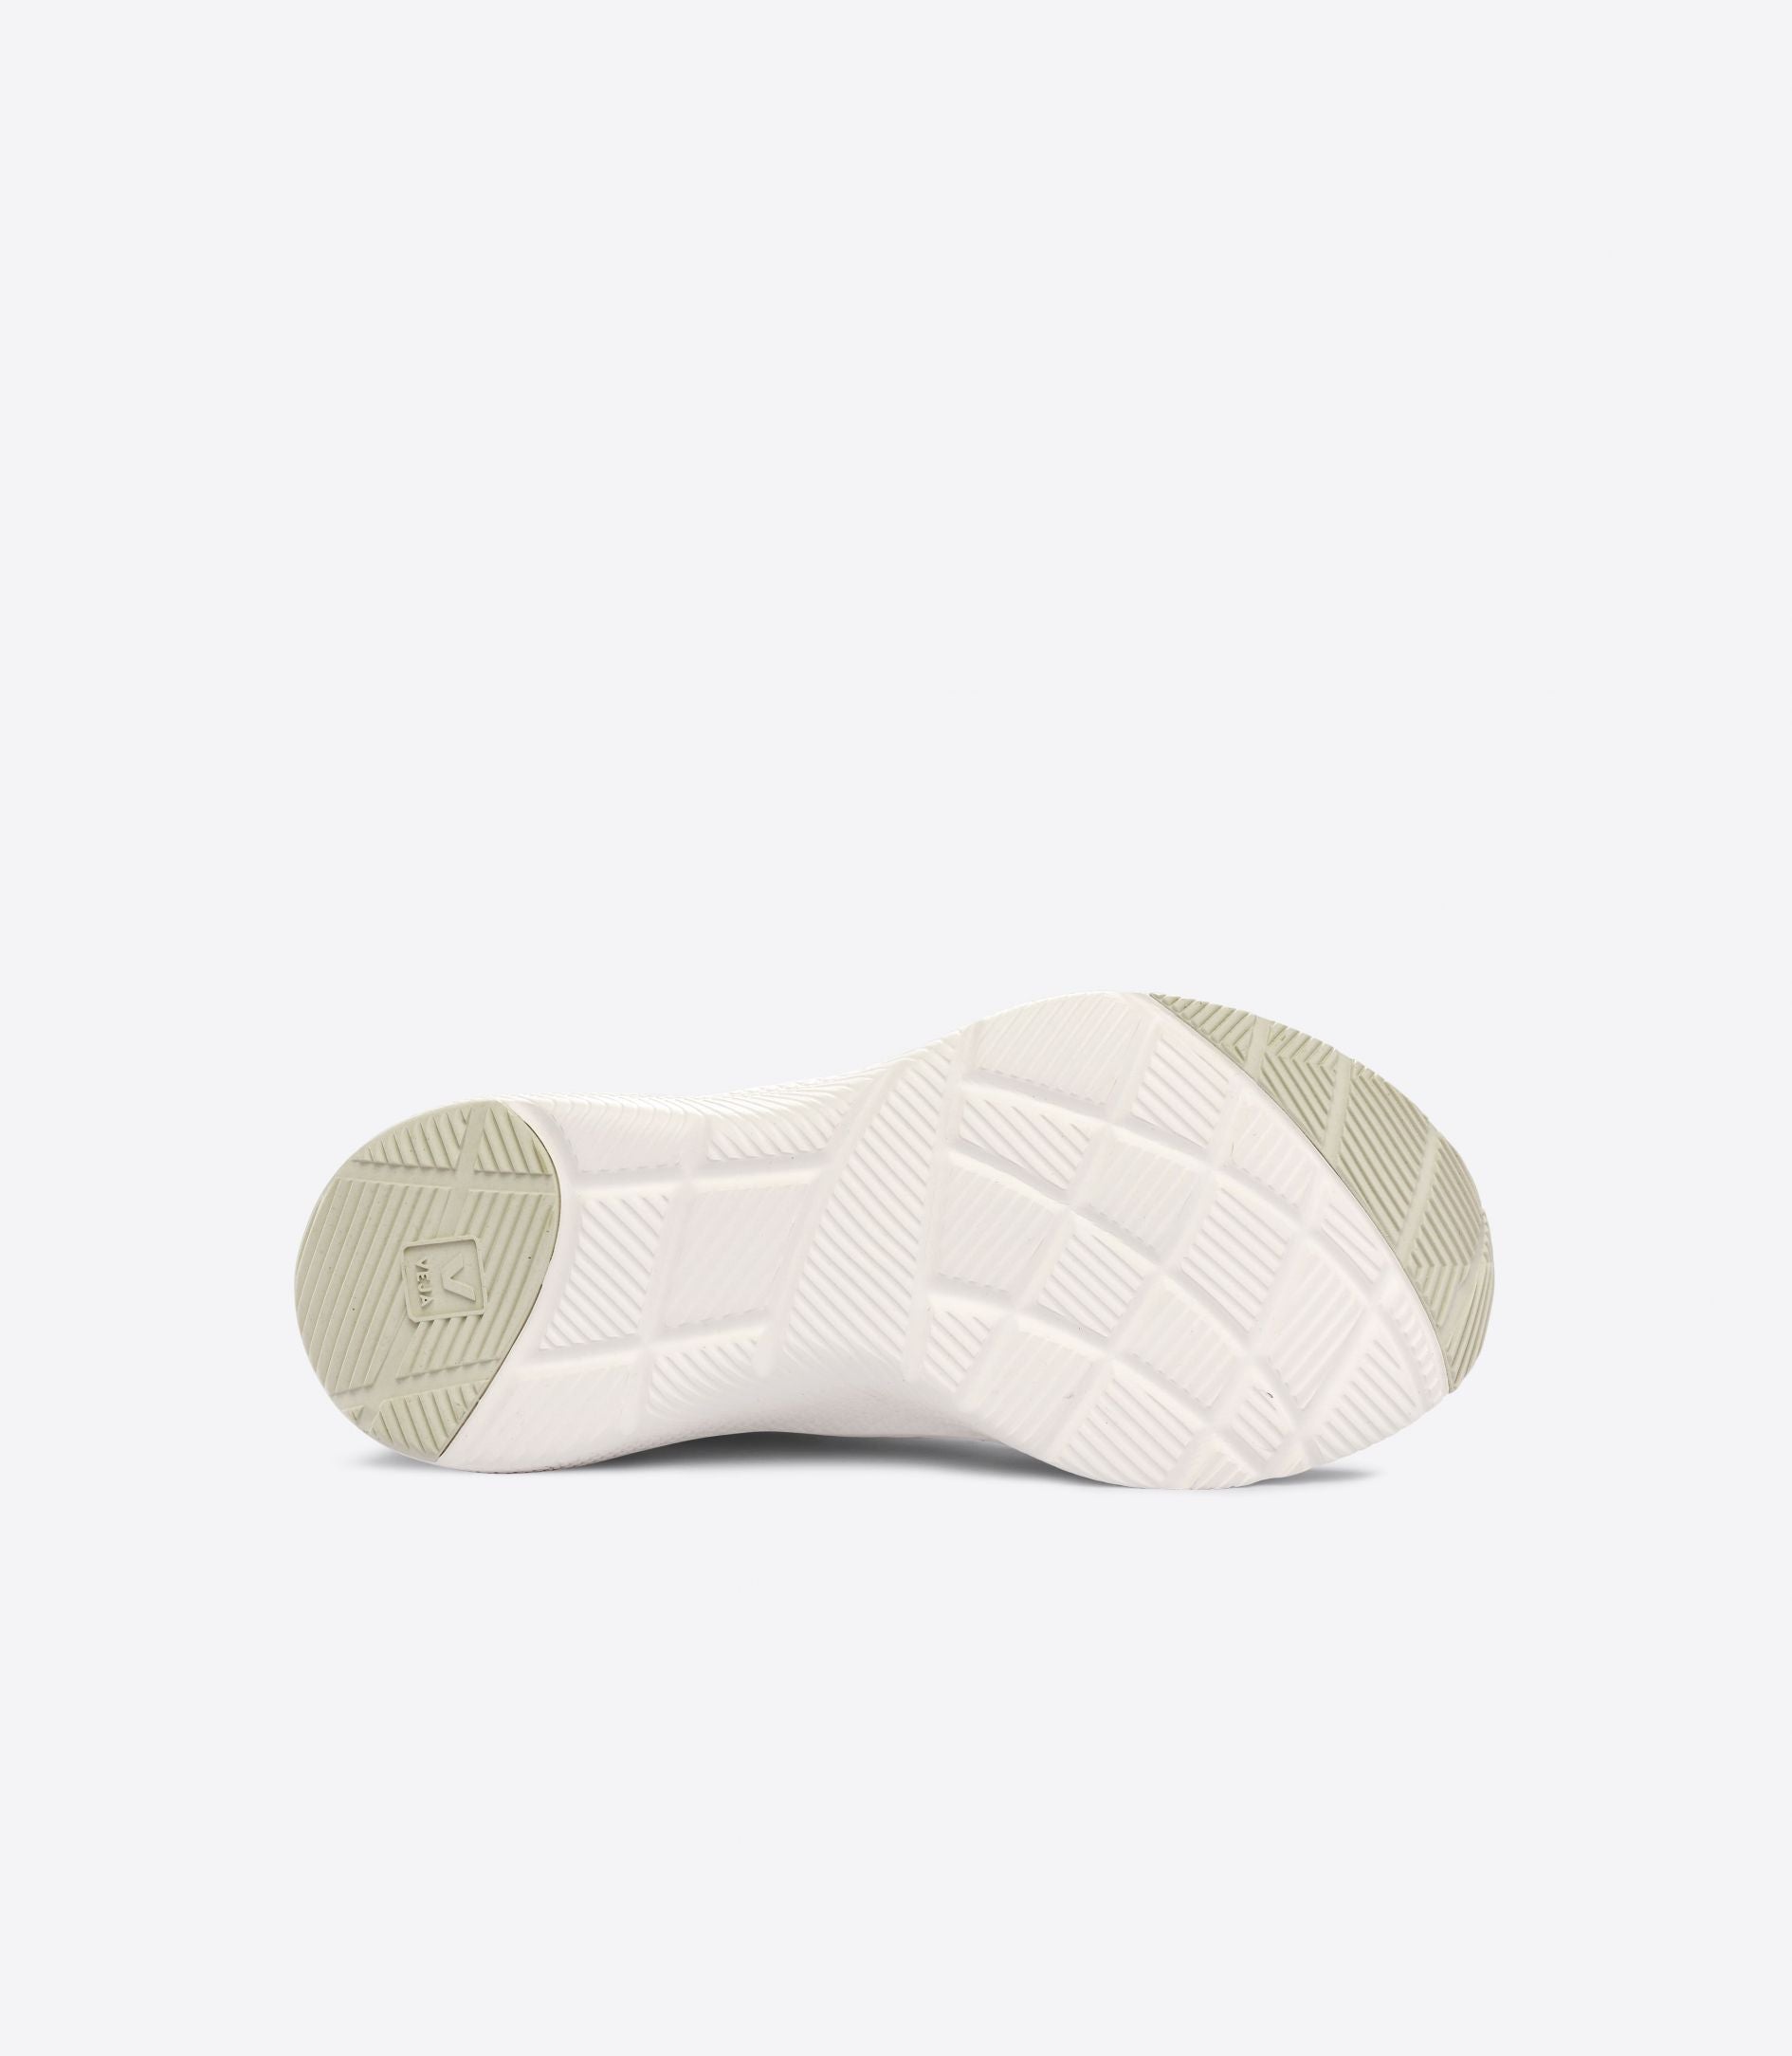 Bottom (outer sole) view of the Women's VEJA Impala in the color Frost/Cream